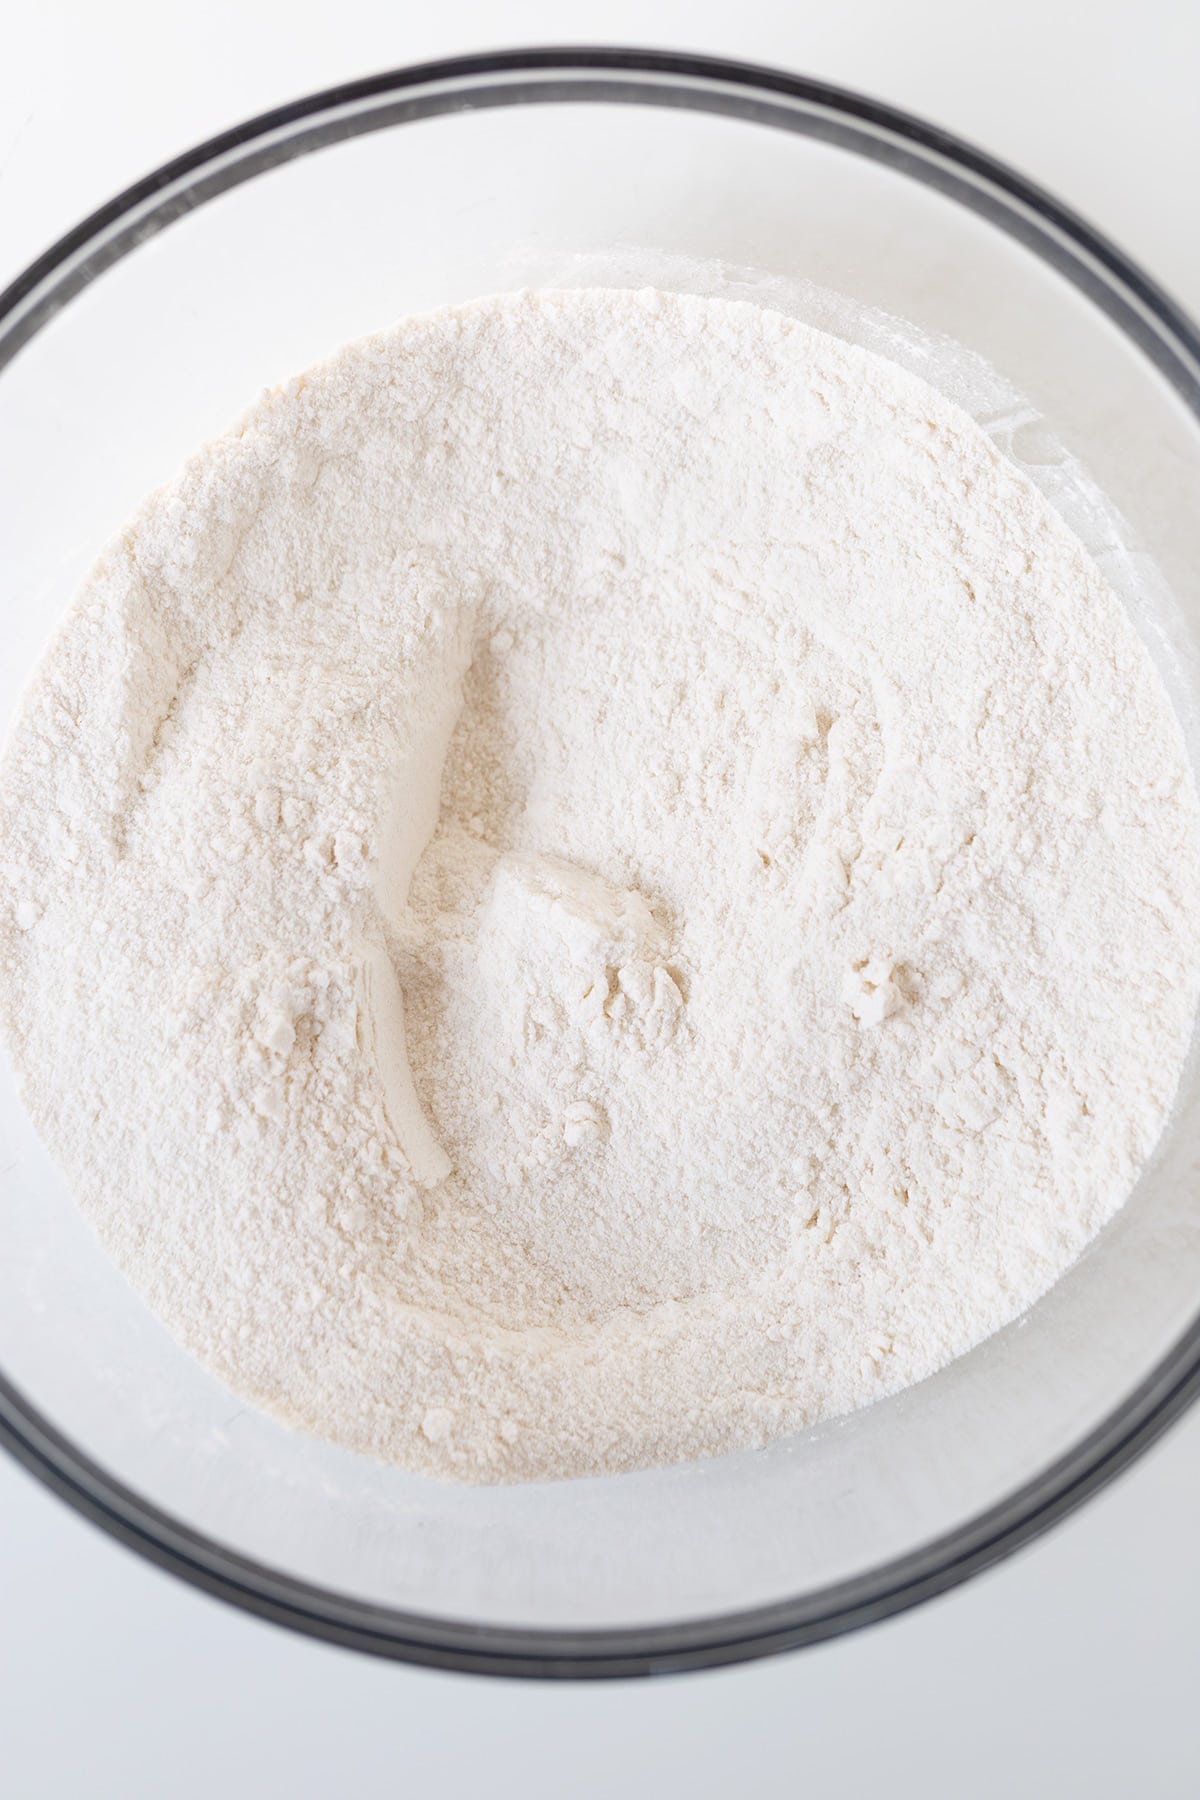 dry ingredients in a bowl on a white surface.